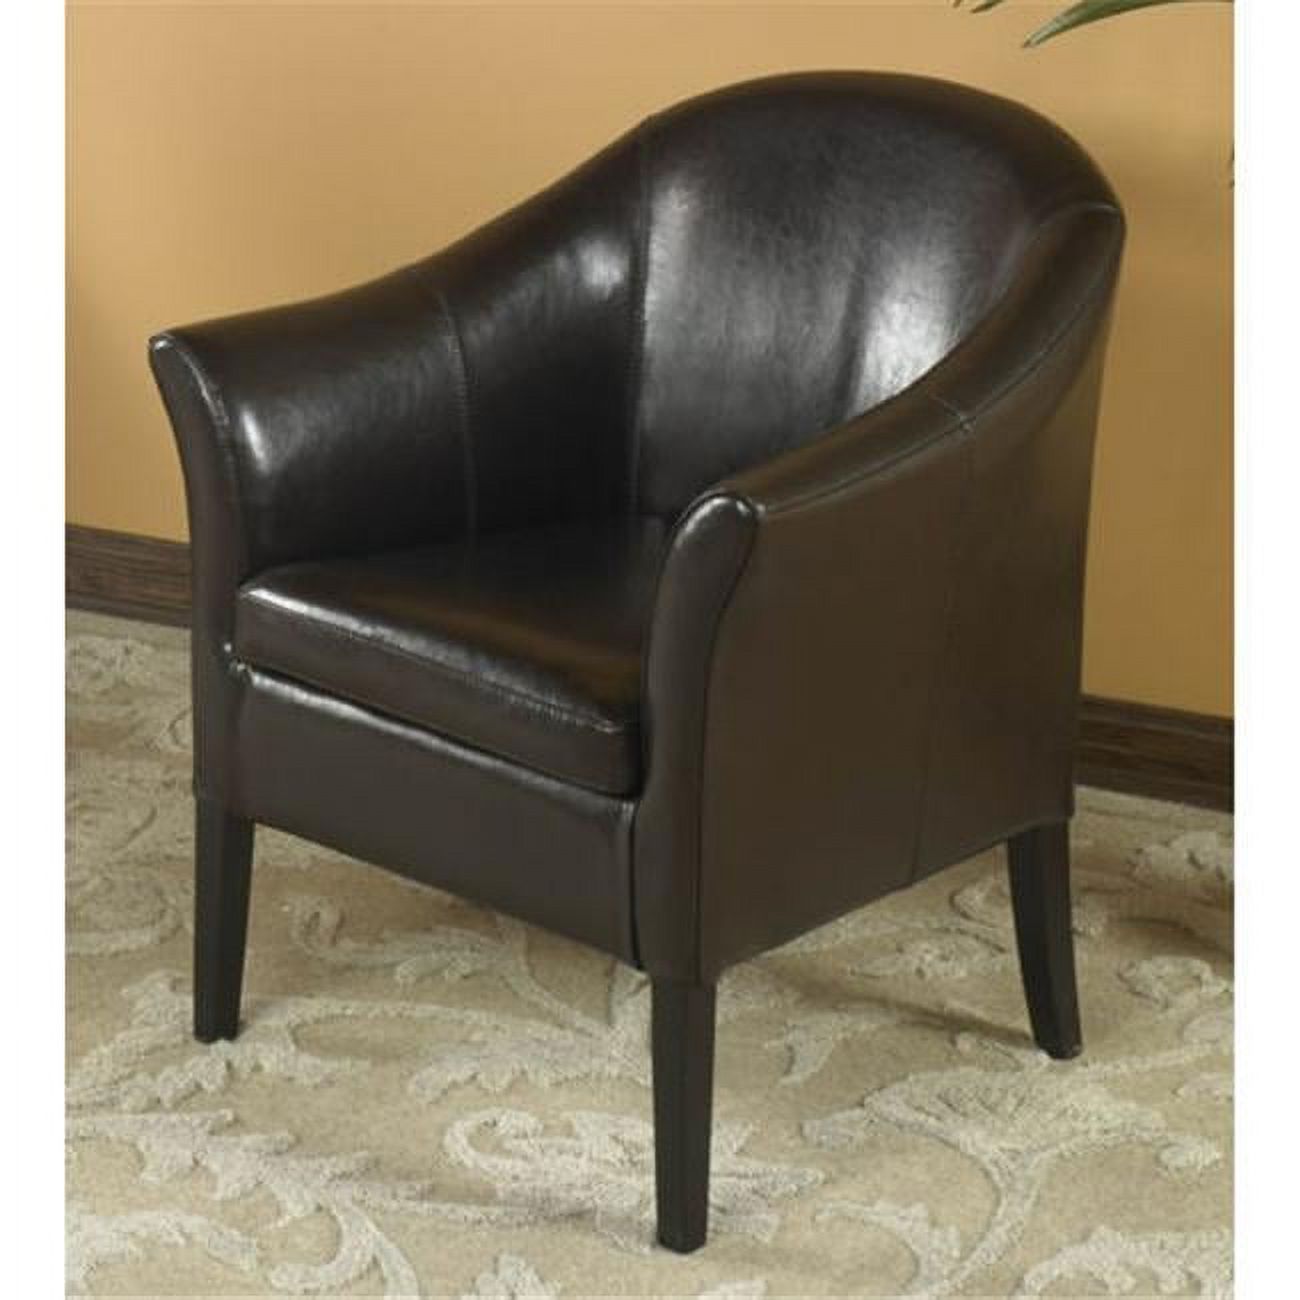 1404 Brown Leather Club Chair - image 1 of 1